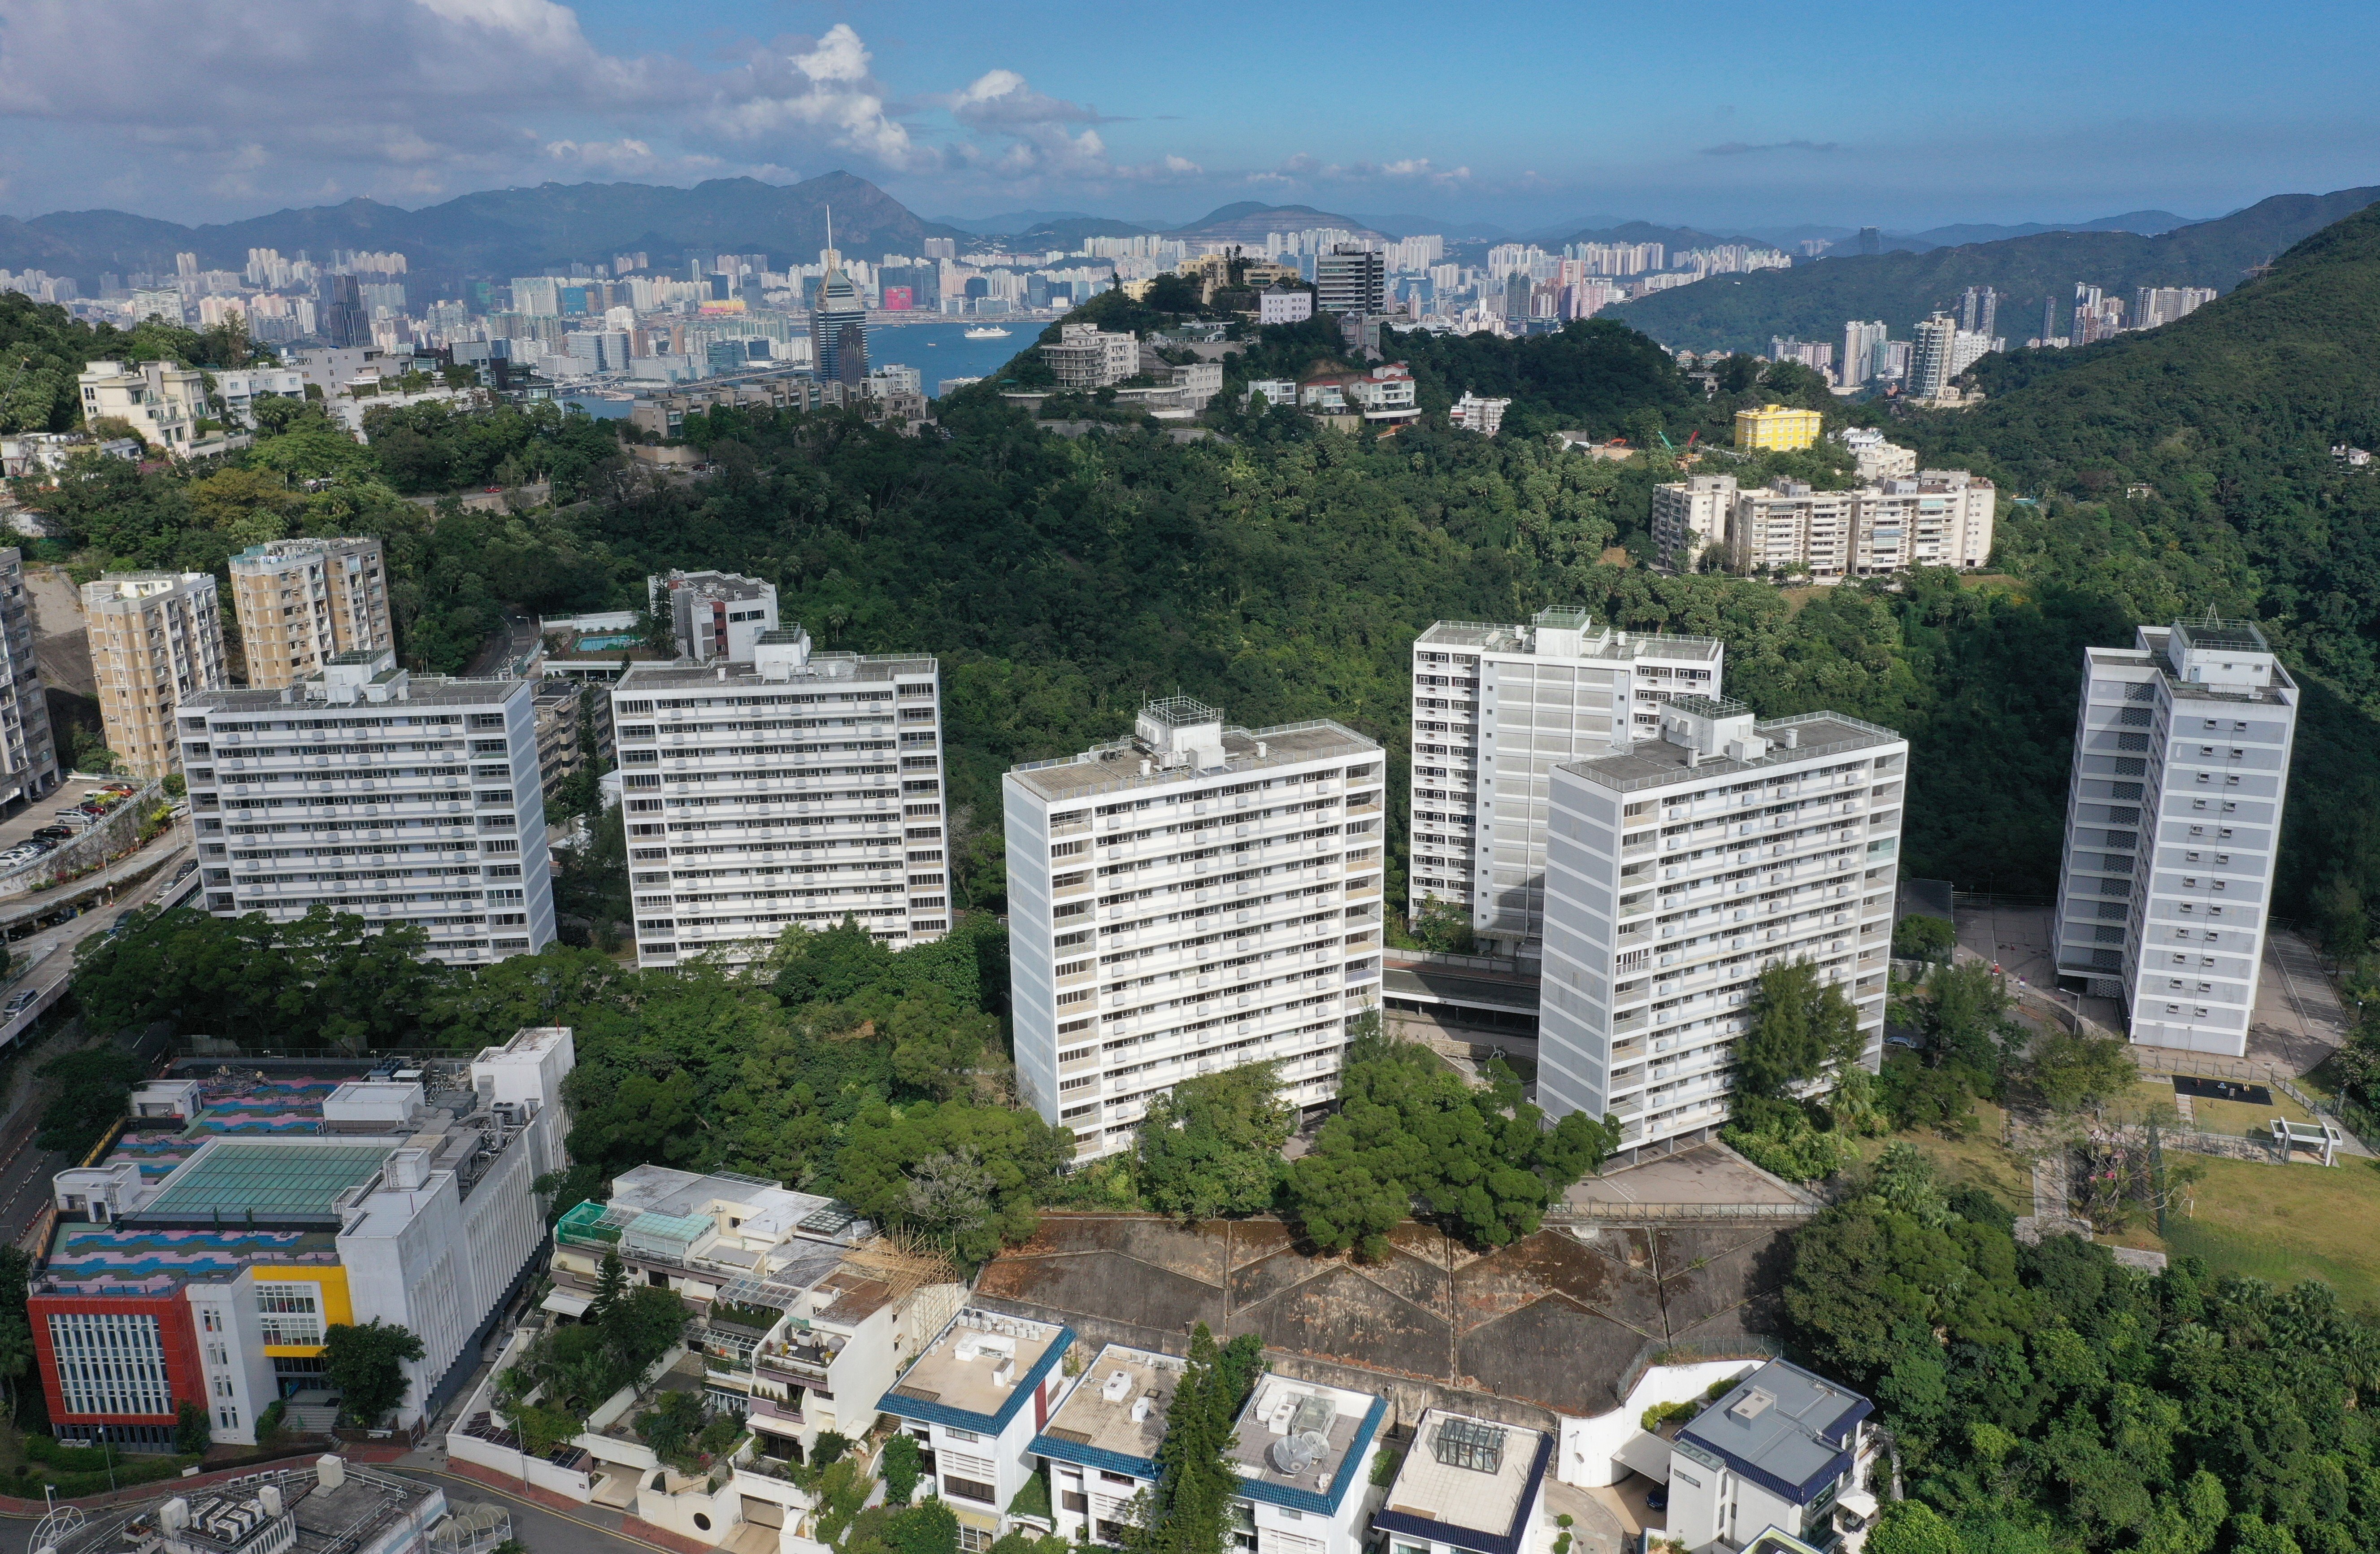 The government-owned Quarters Premises on Mansfield Road, The Peak. Photo: Winson Wong